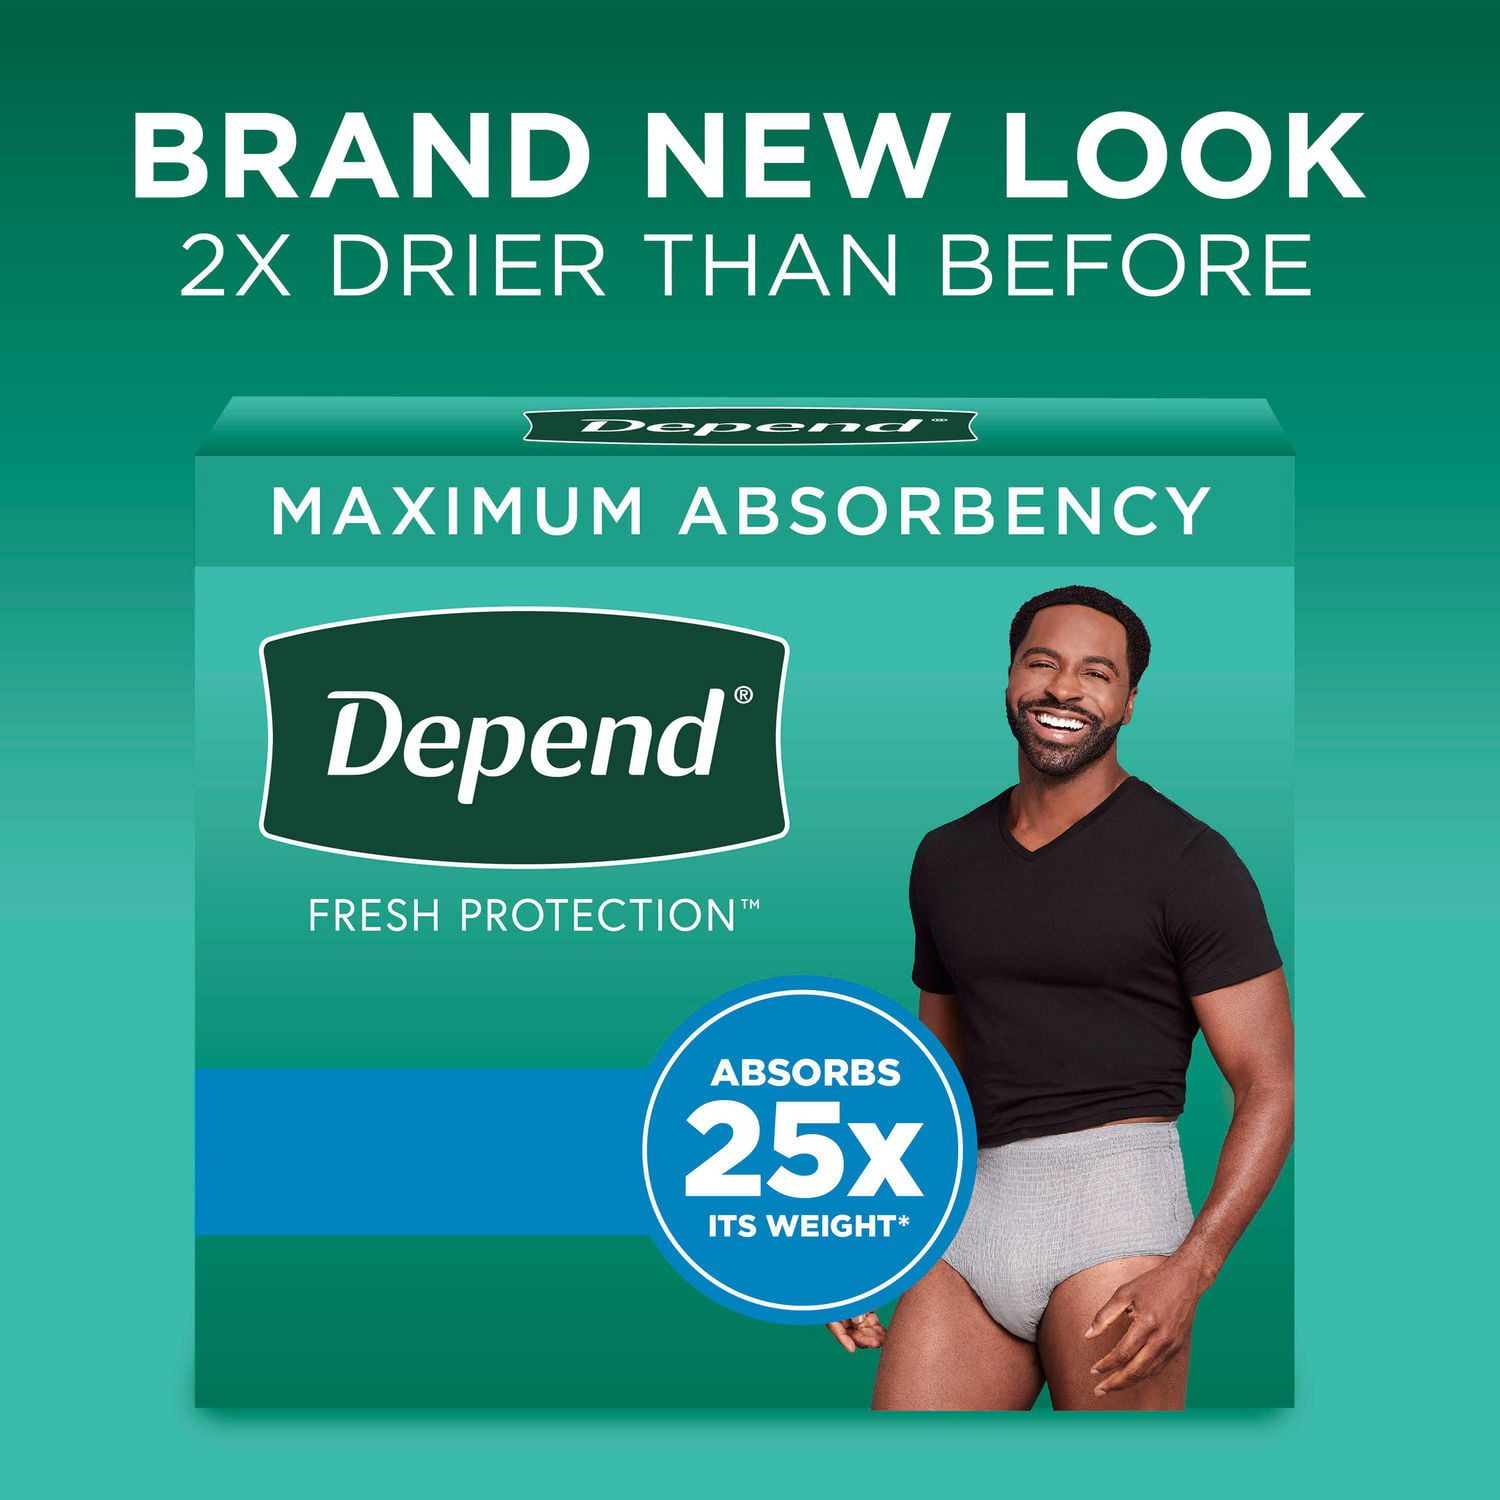 Depend Fresh Protection Adult Incontinence Underwear for Men (Formerly  Depend Fit-Flex), Disposable, Maximum, Grey, 36 - 44 Count